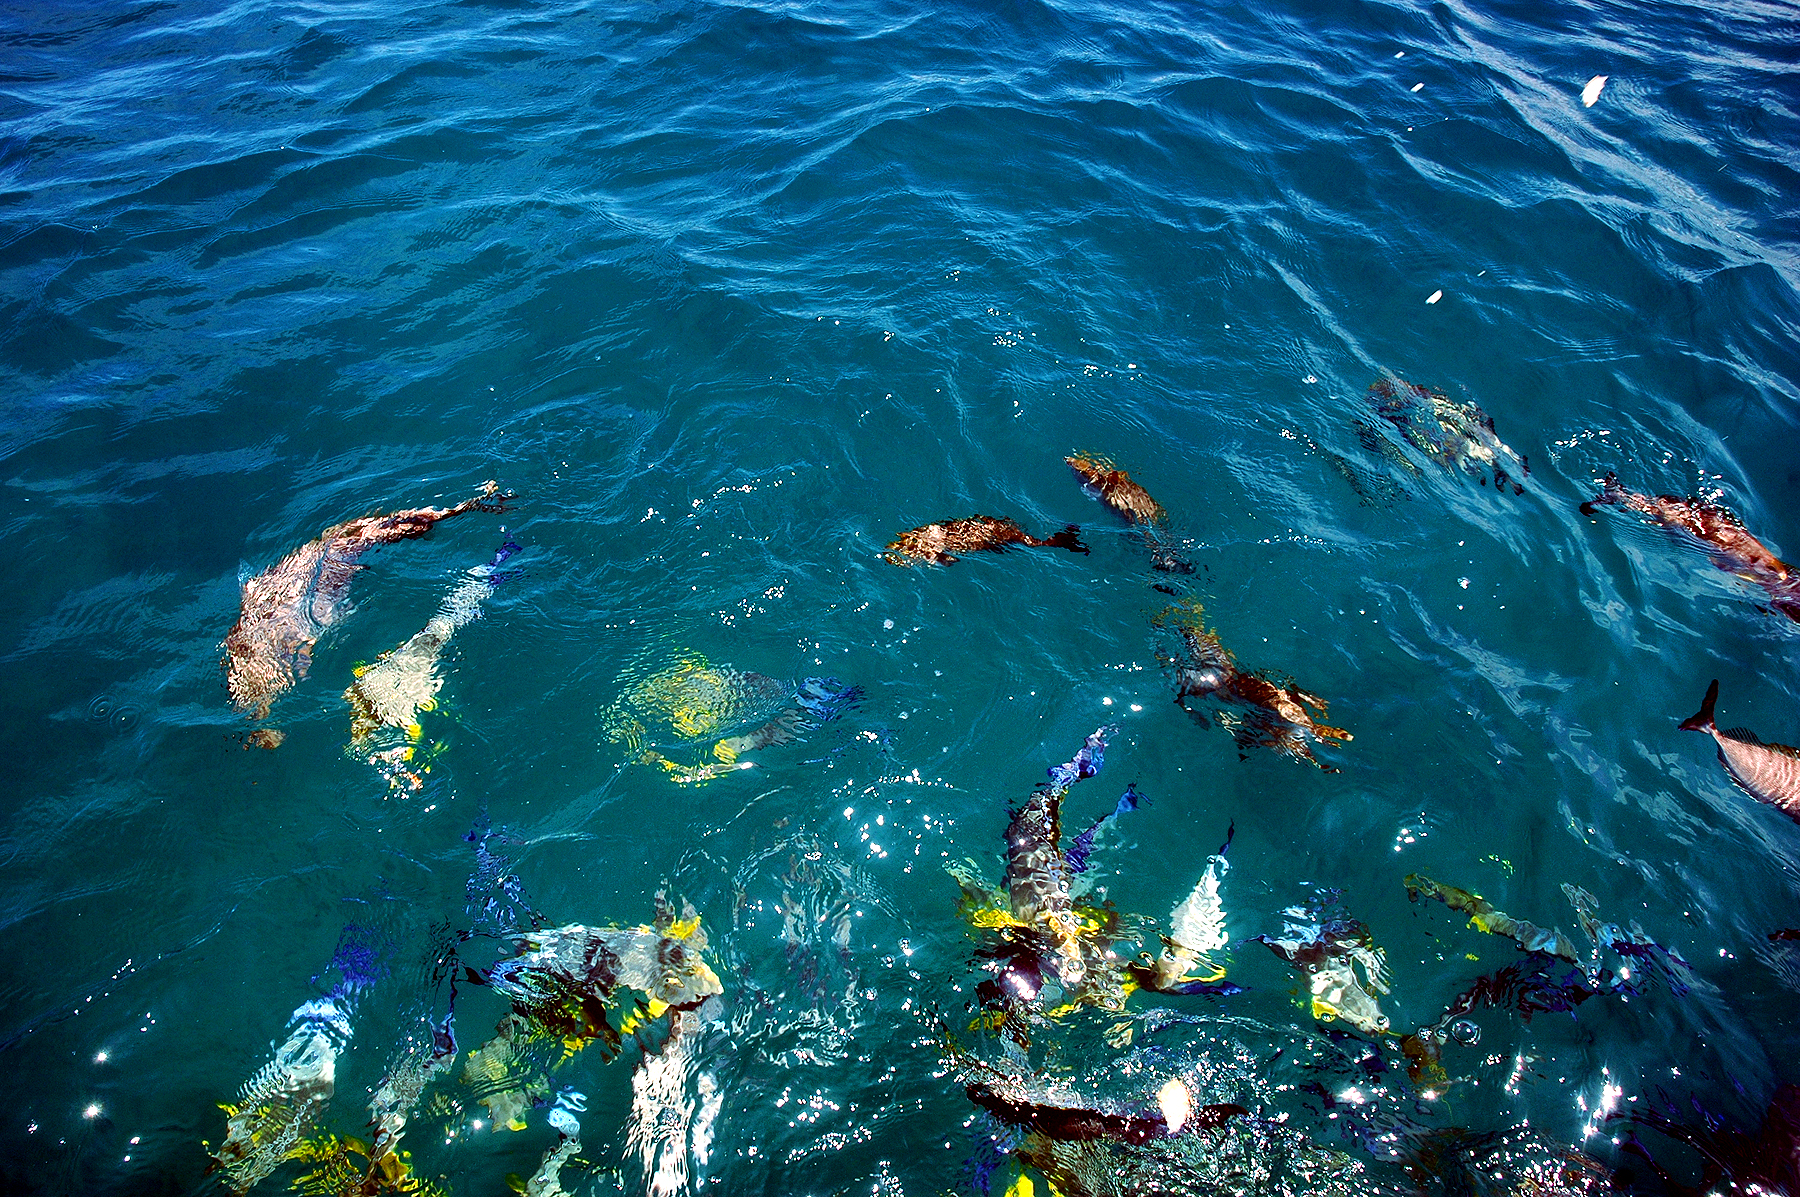 Eclipse 2012 - A44 - Reef Fish 4